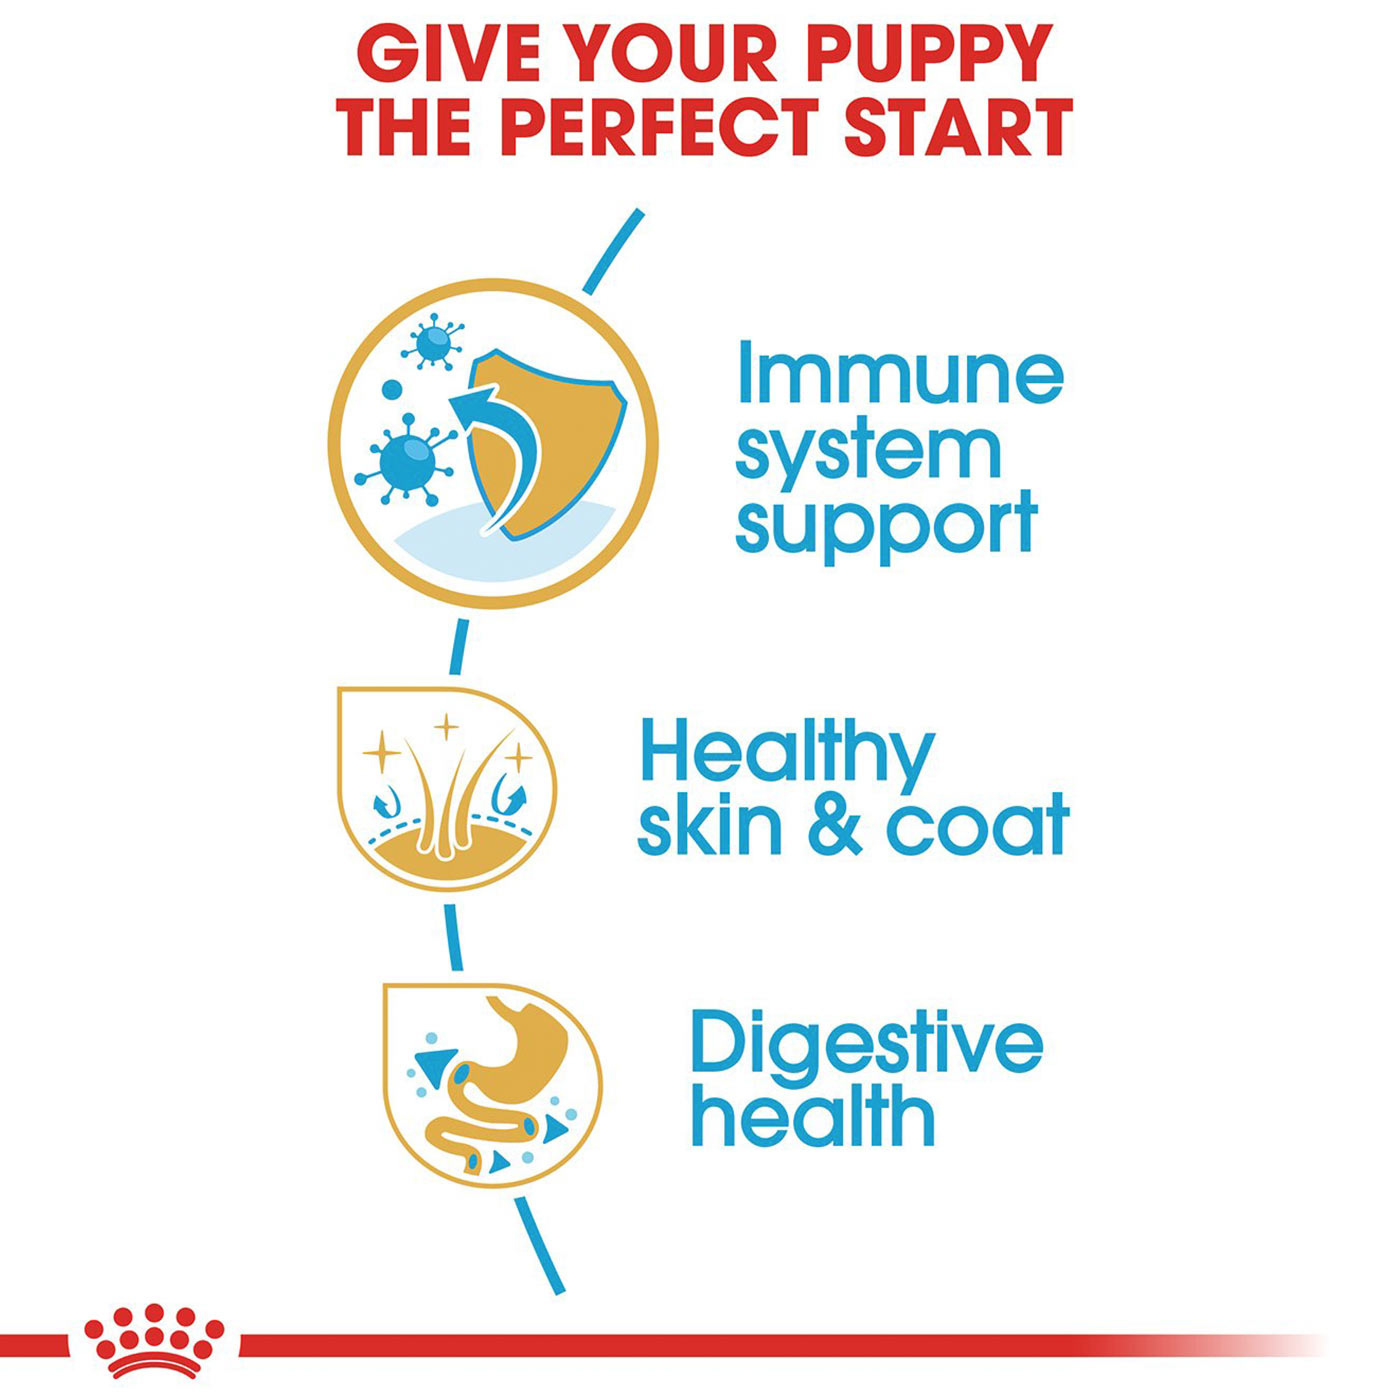 Royal Canin Cocker Dry Puppy Food 